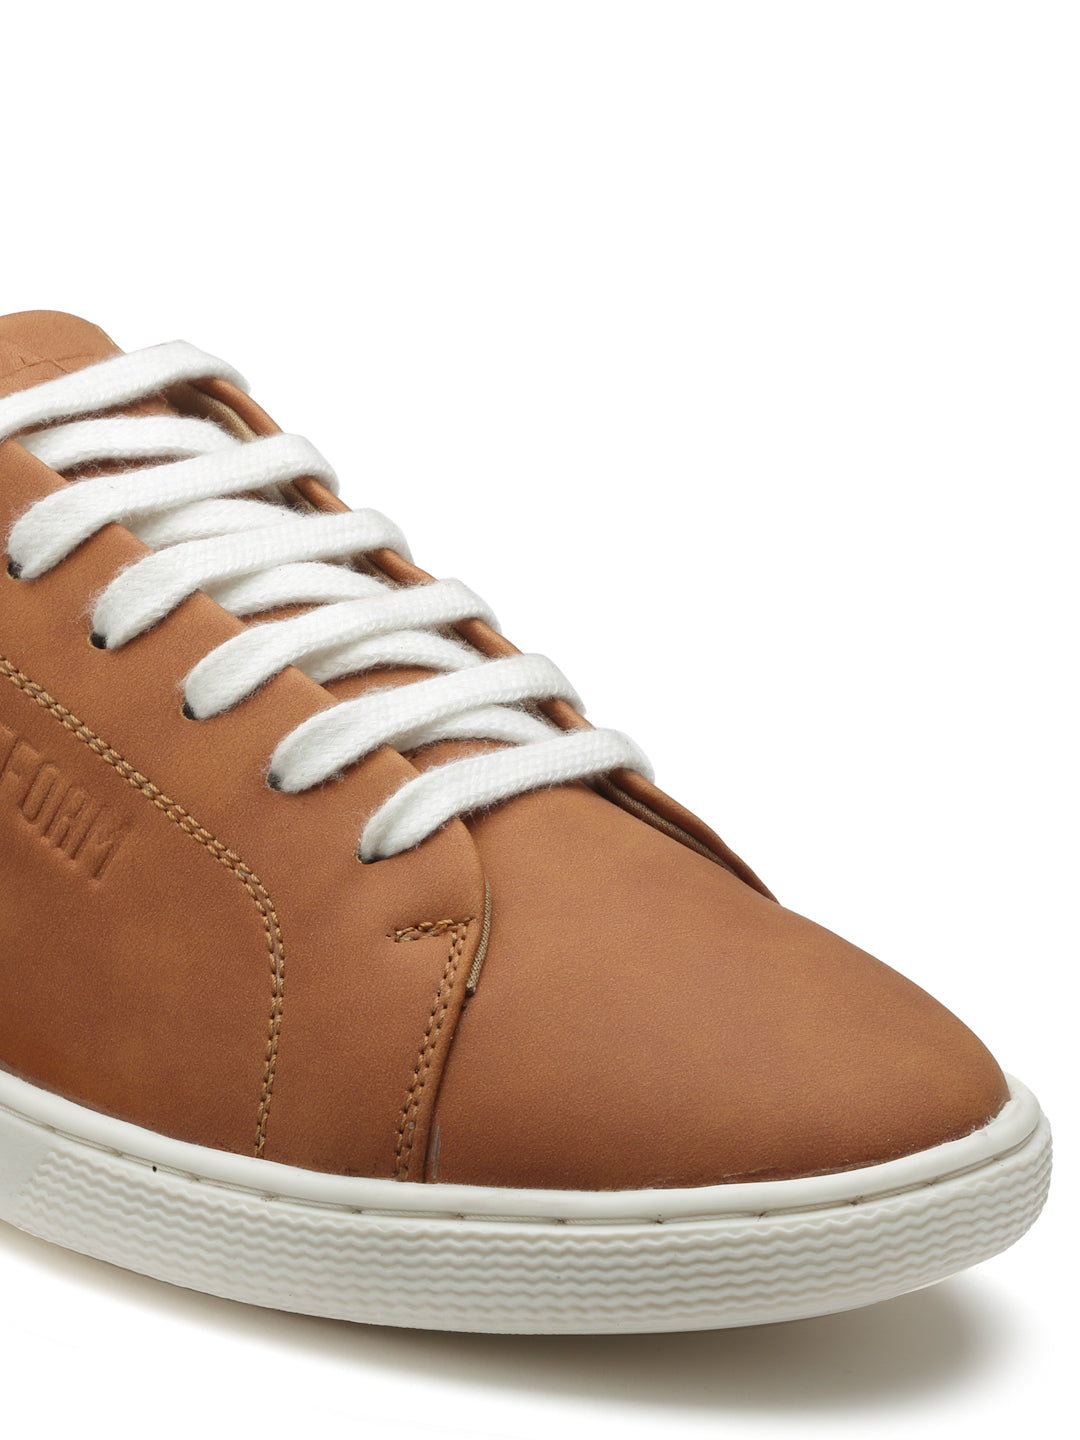 REFOAM Men's Tan Synthetic Leather Lace-Up Casual Sneaker